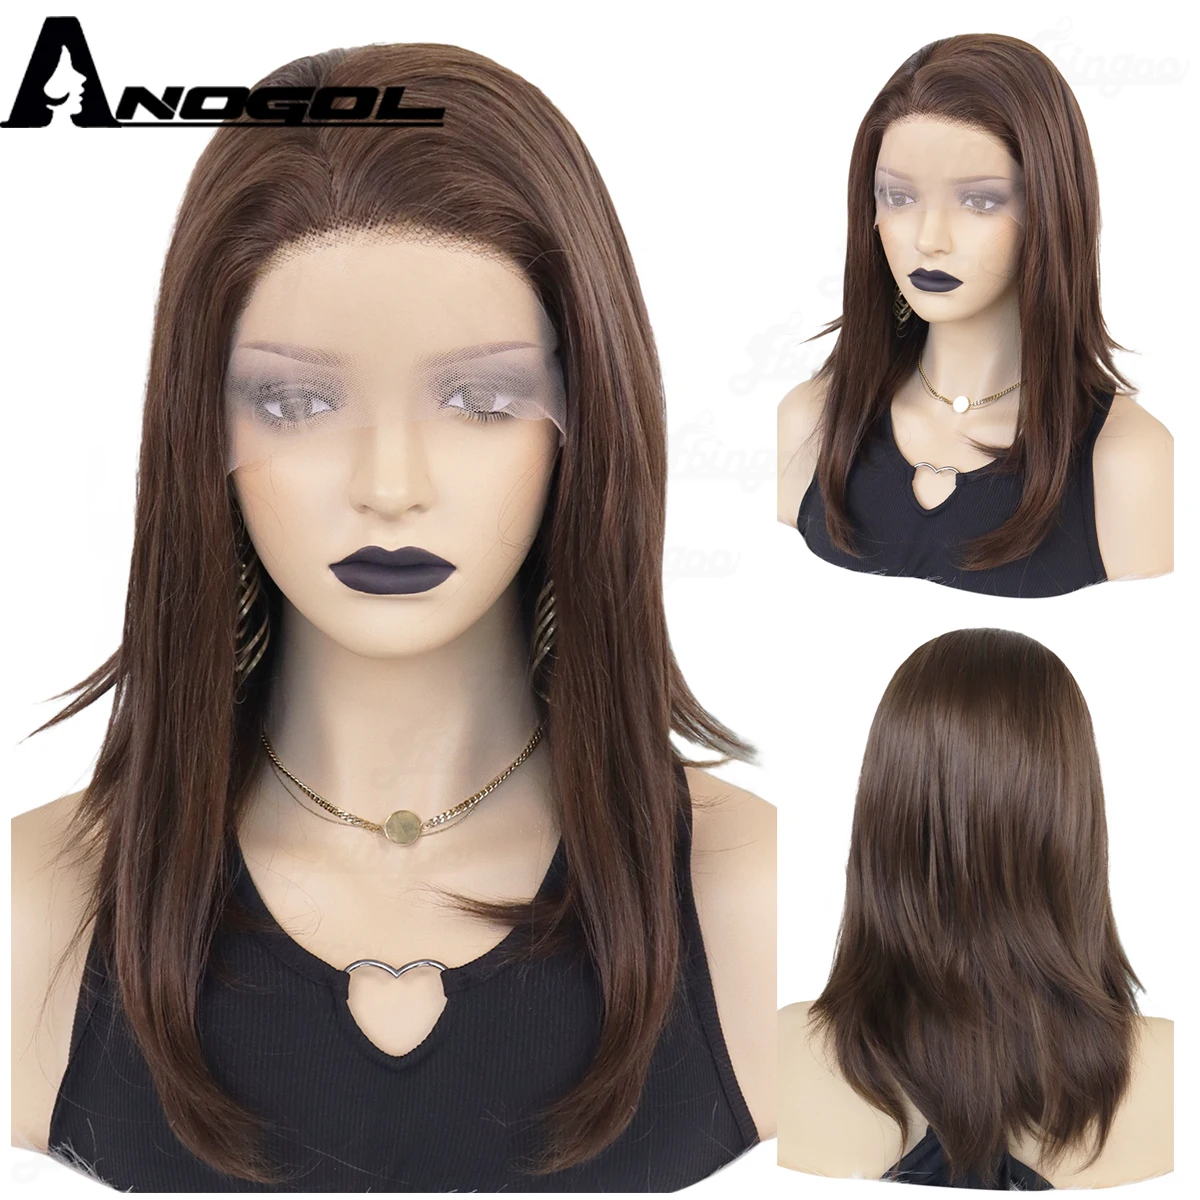 Anogol Synthetic 13*2.5 Dark Brown Straight High Temperature Fiber Lace Front Wig for Wowen Free Part